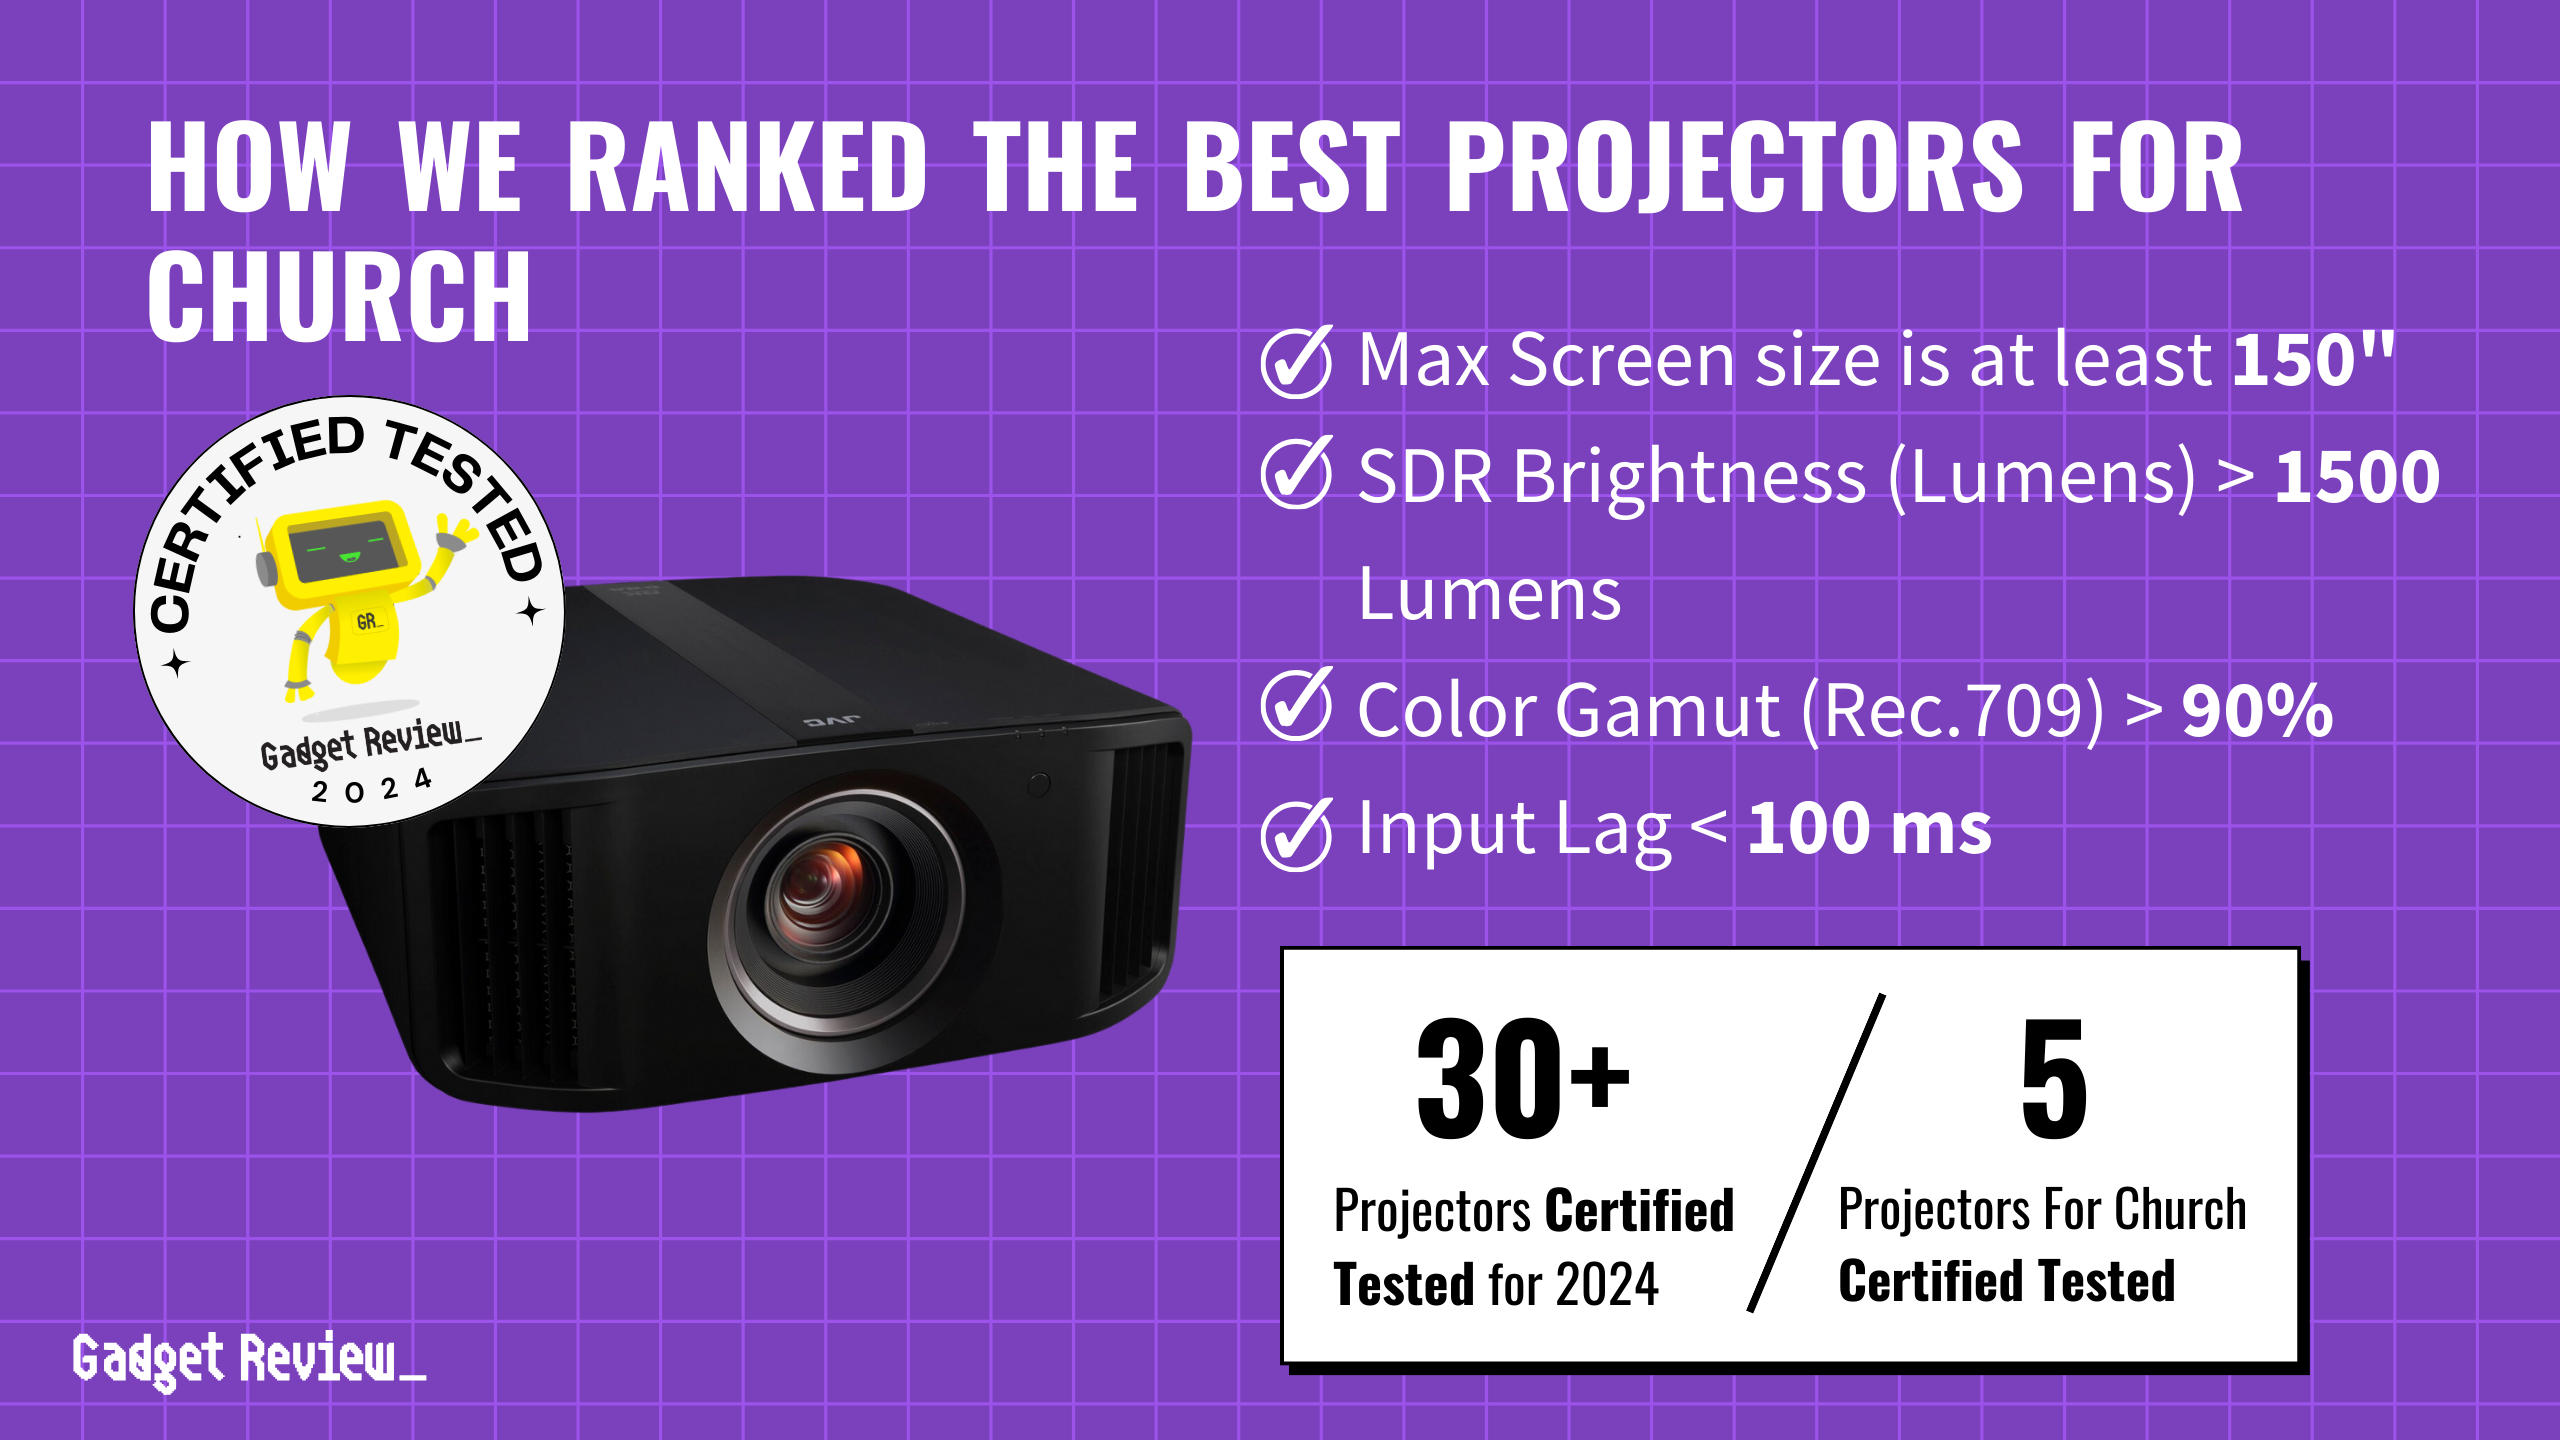 How We Ranked the 5 Best Projectors for Church